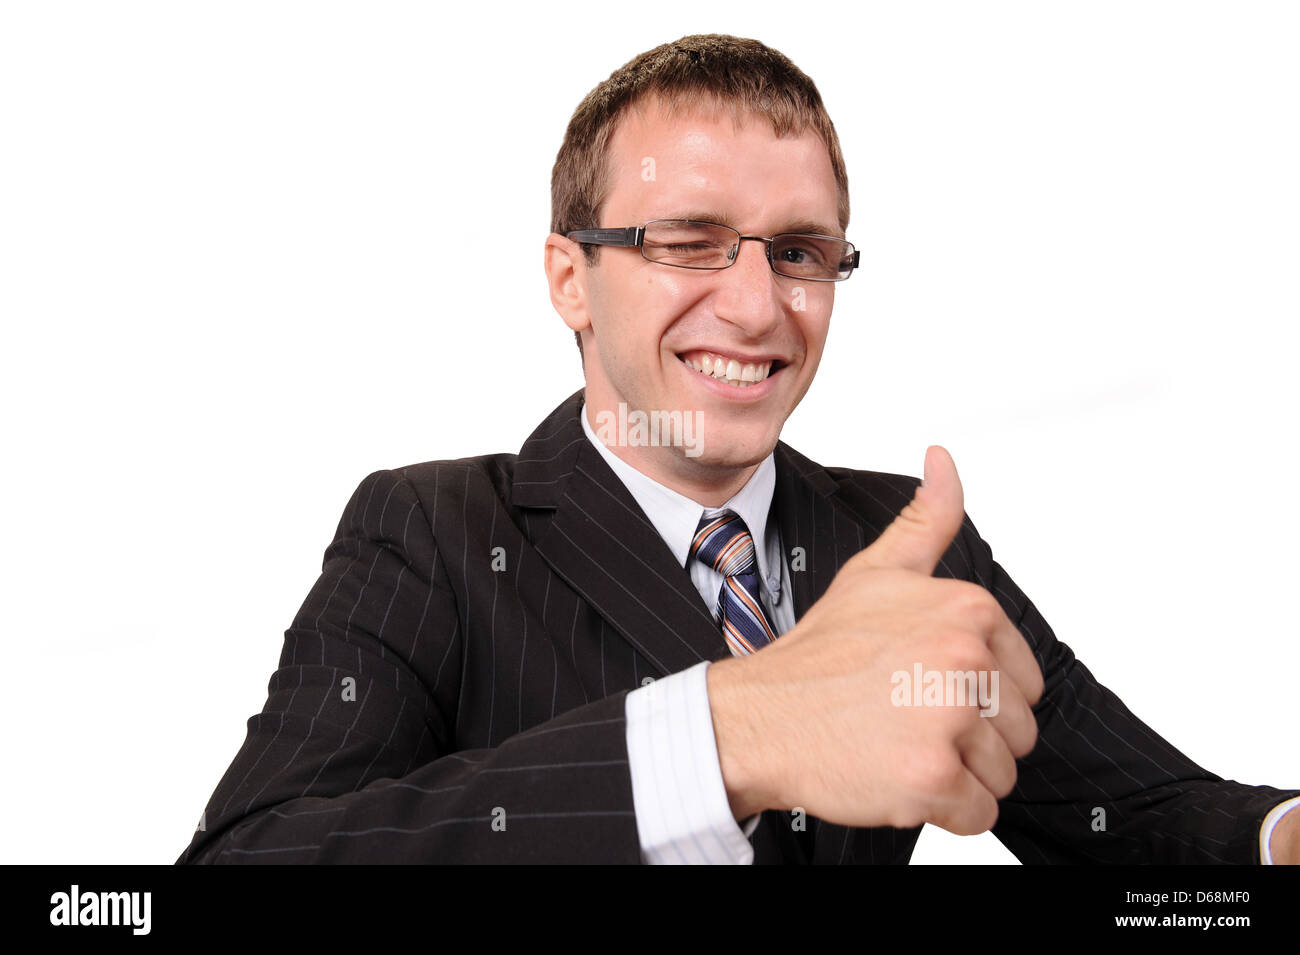 Job Well Done - Thumbs Up Stock Photo